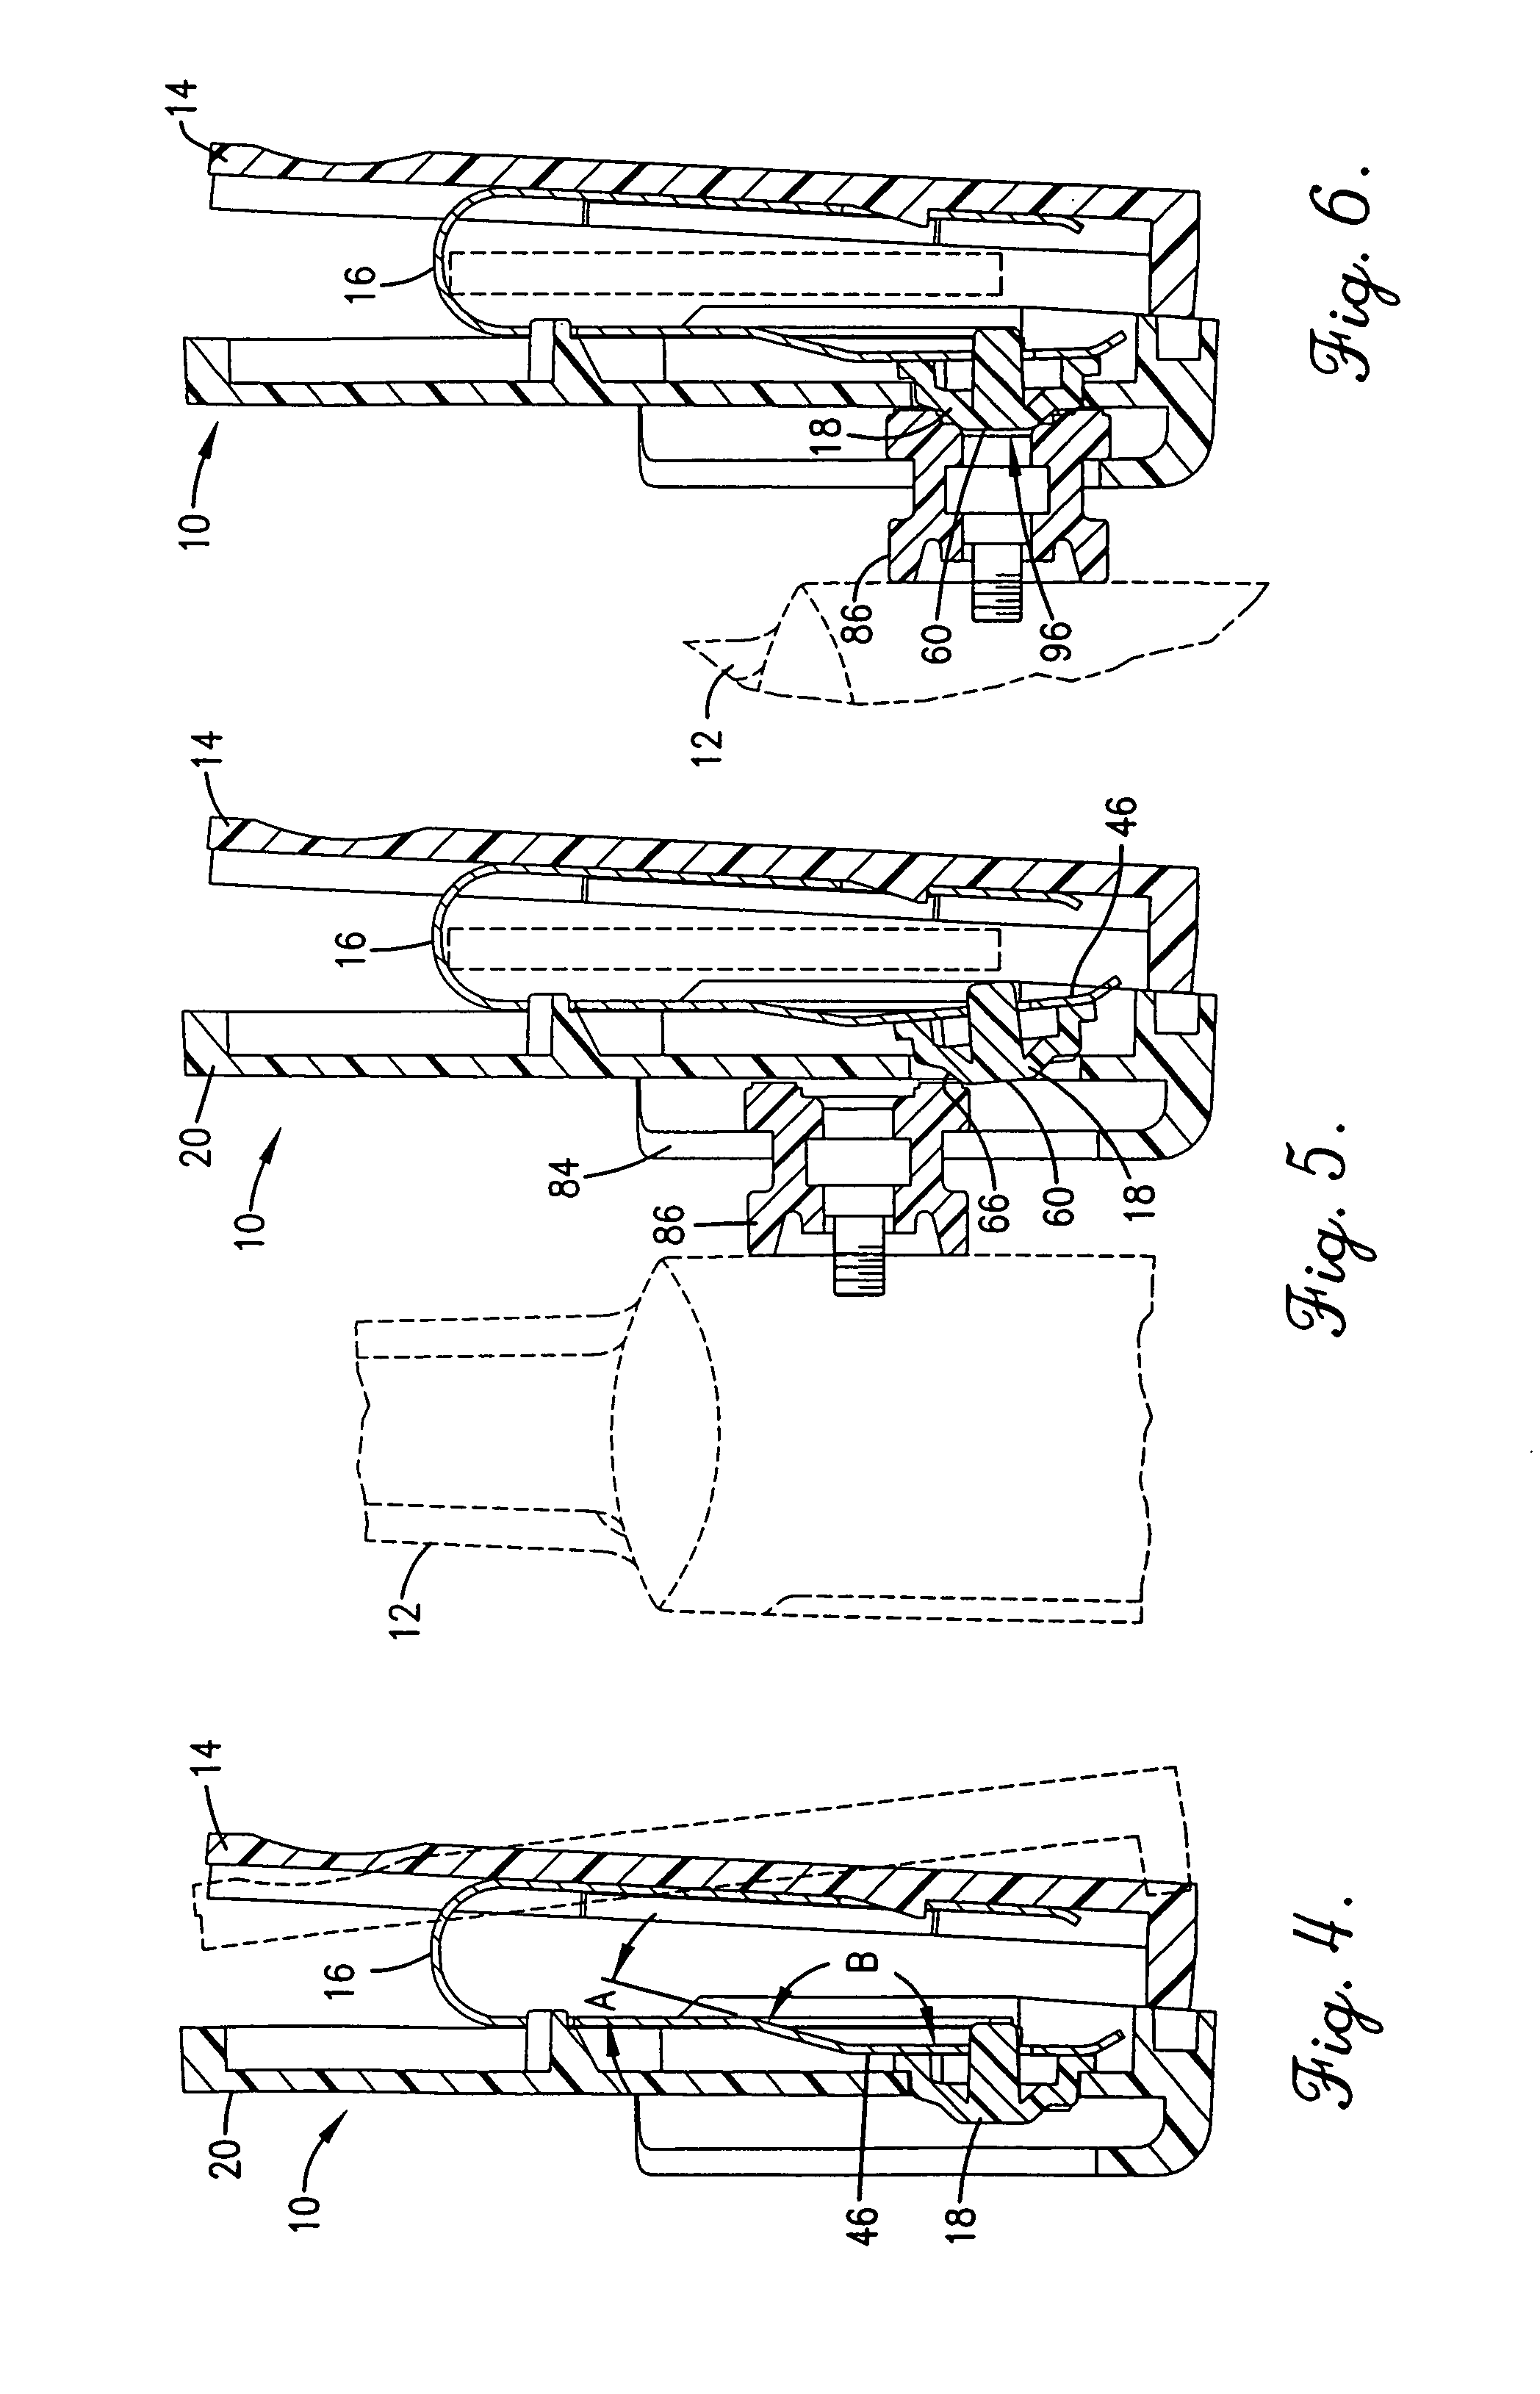 Carrying assembly and method for securement of electronic devices